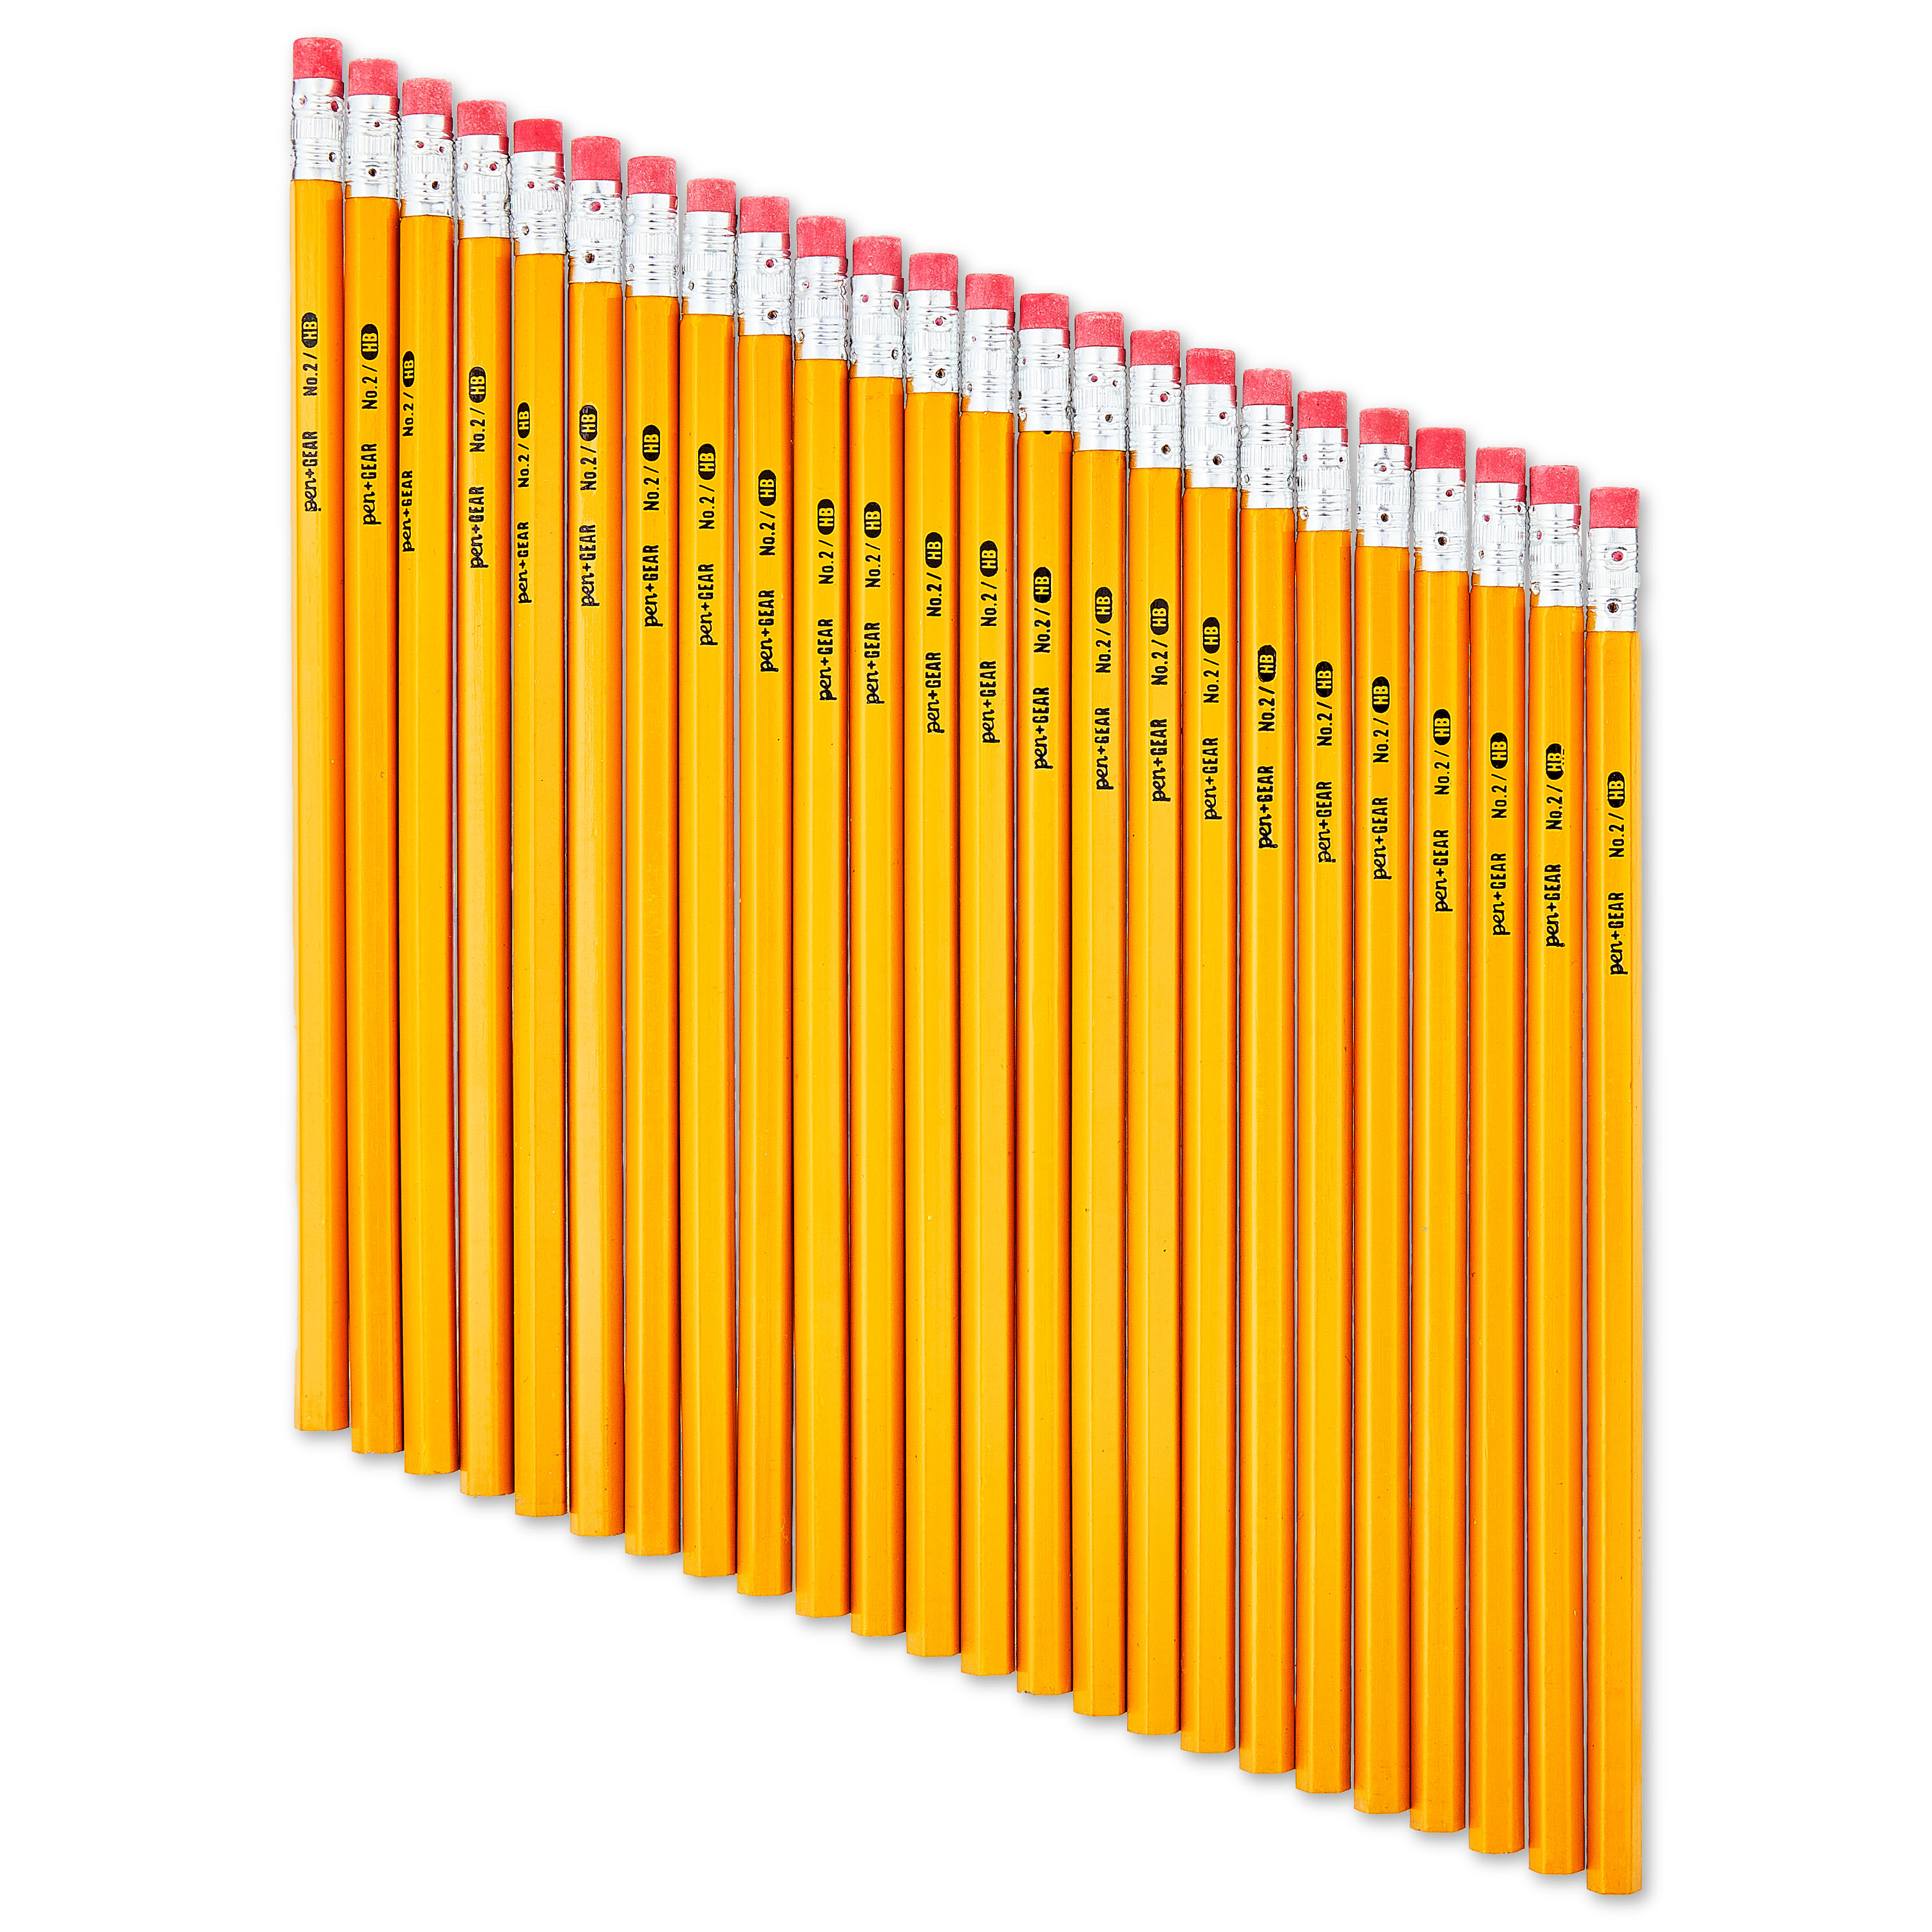 Pen+Gear No. 2 Wood Pencils, Unsharpened, 24 Count - image 5 of 9